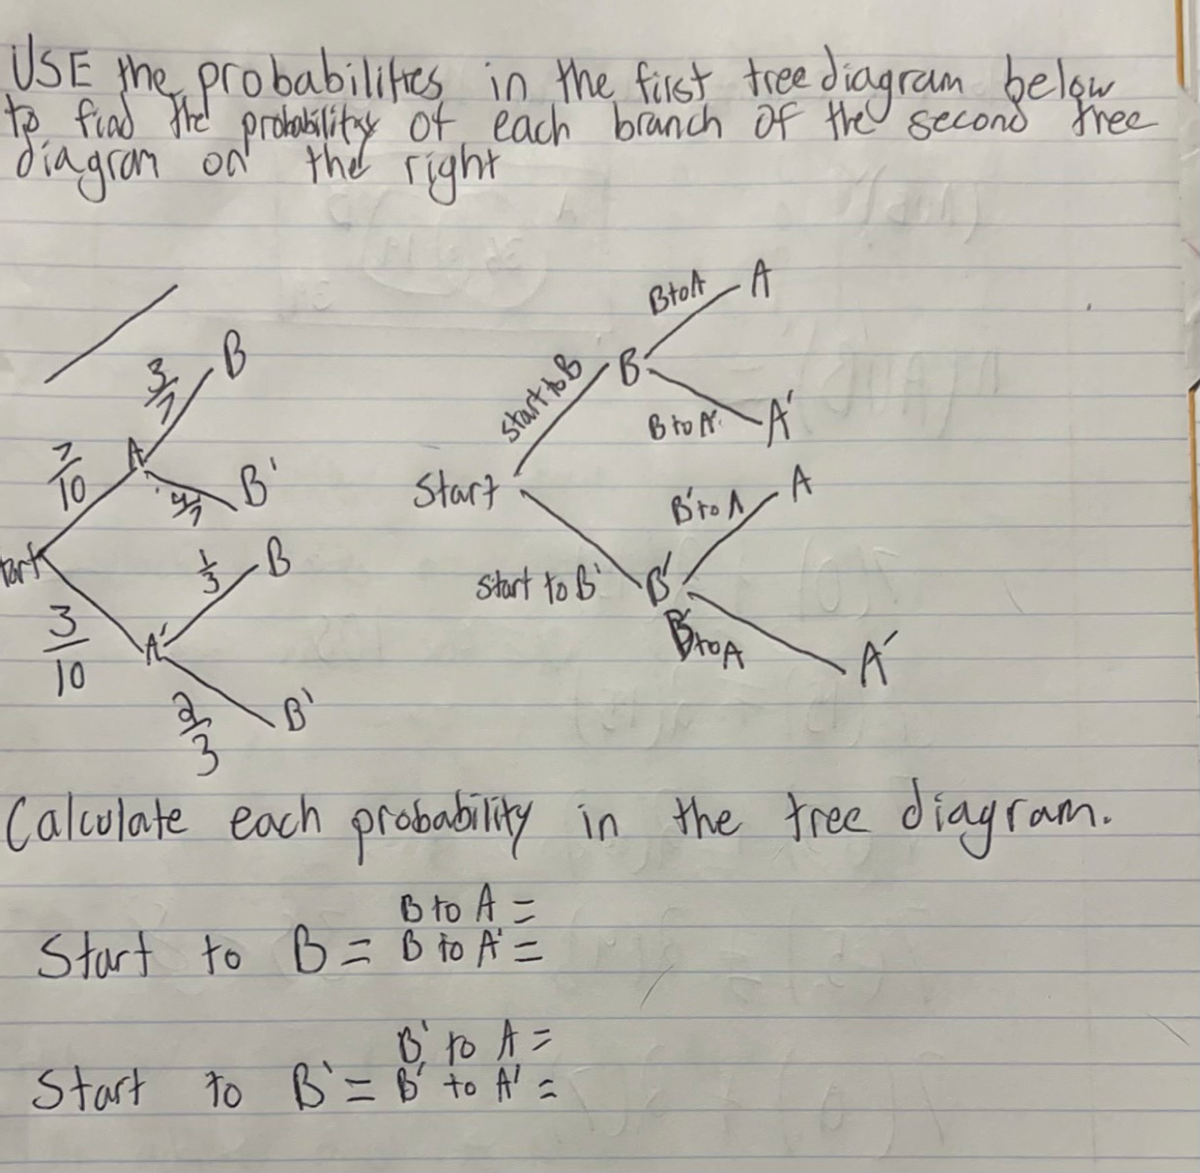 USE the probabilities in the first tree diagram below
to find the probabilitax of each branch of the second free
diagram on
the right
g
ölv
Park
10
B
B'
и в
of m
½ B
Start
start to B
Btoft
B₁ to A =
Start to B = B' to A² =
·B:
A
Bro A A
В'тол
Start to B² B
A
JA
BROA Á
B¹
Calculate each probability in the tree diagram.
B to A =
Start to B = B to A² =